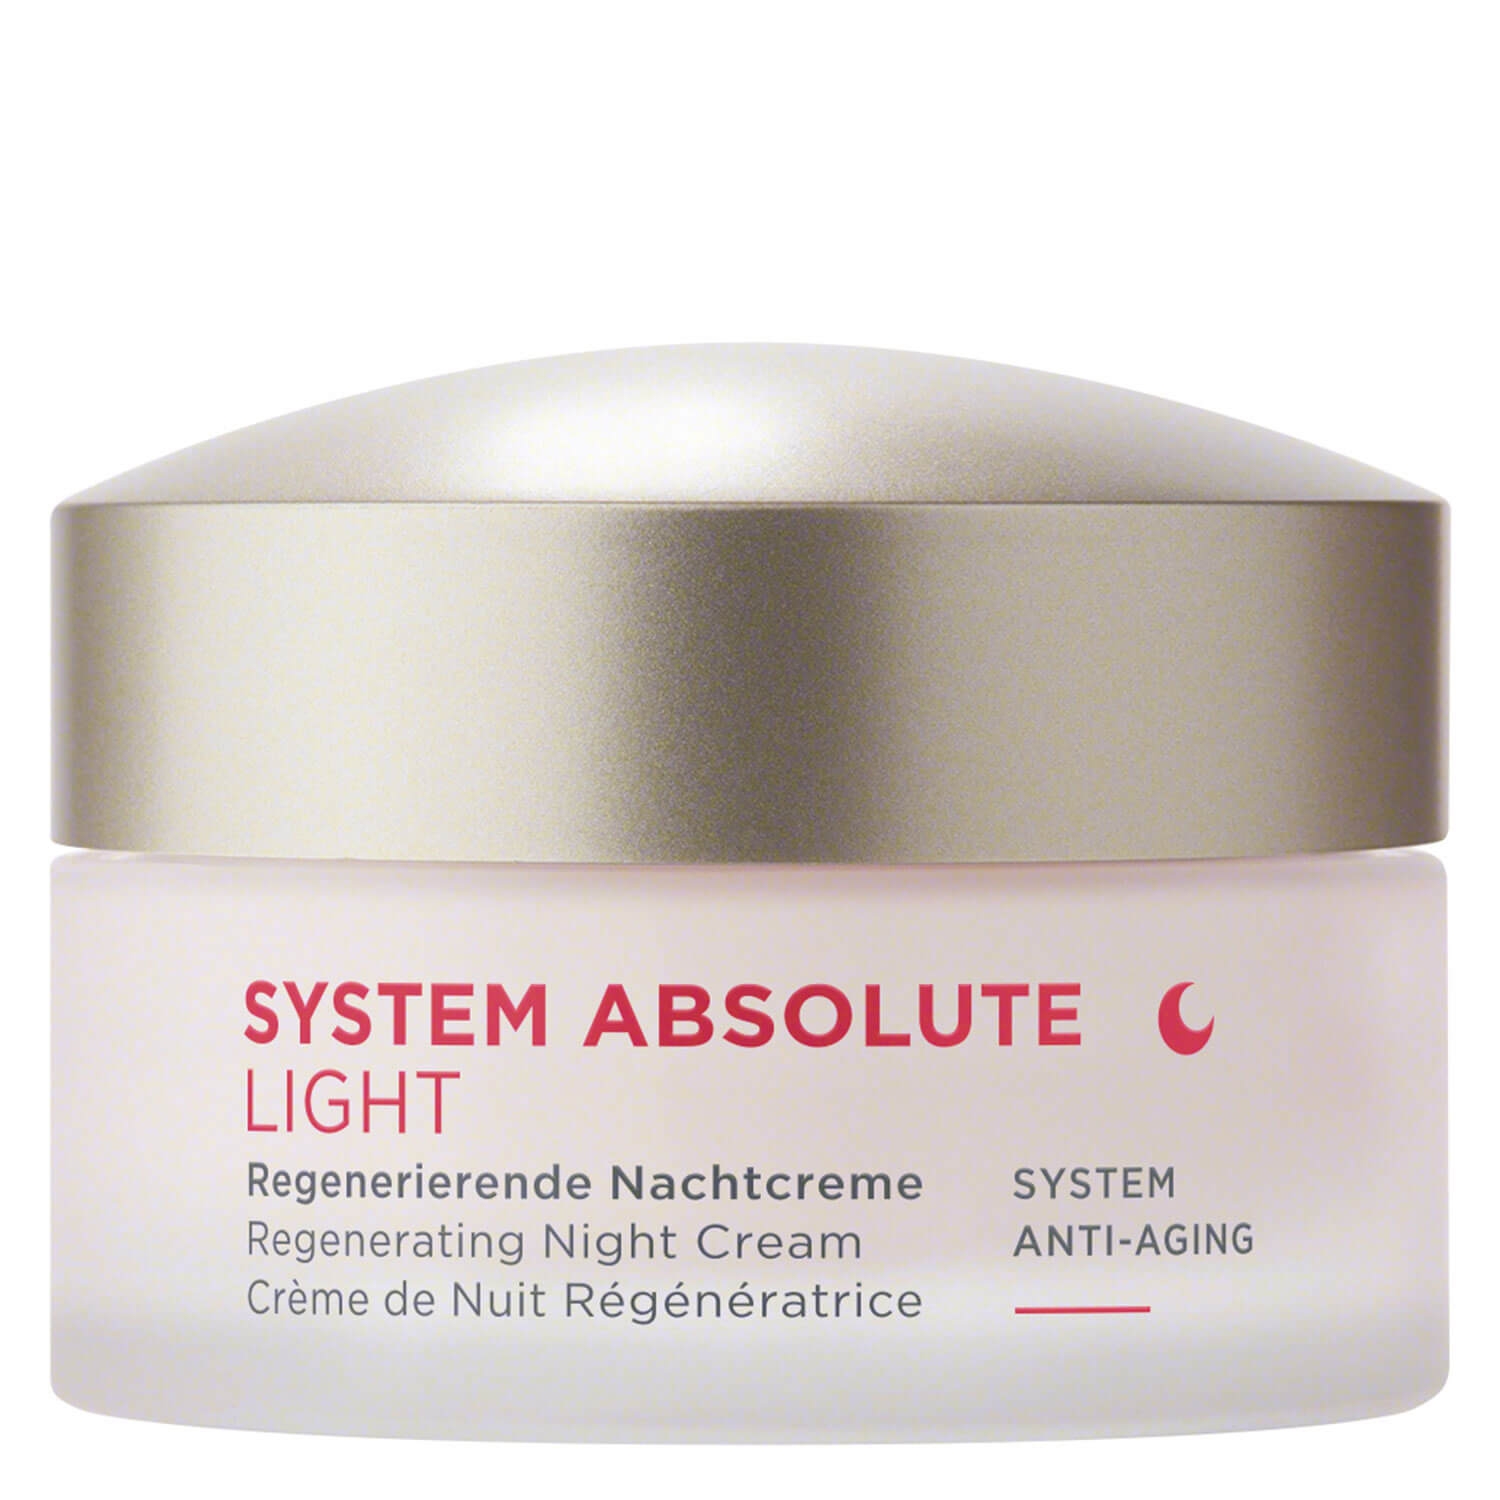 Product image from System Absolute - Anti-Aging Regenerierende Nachtcreme Light